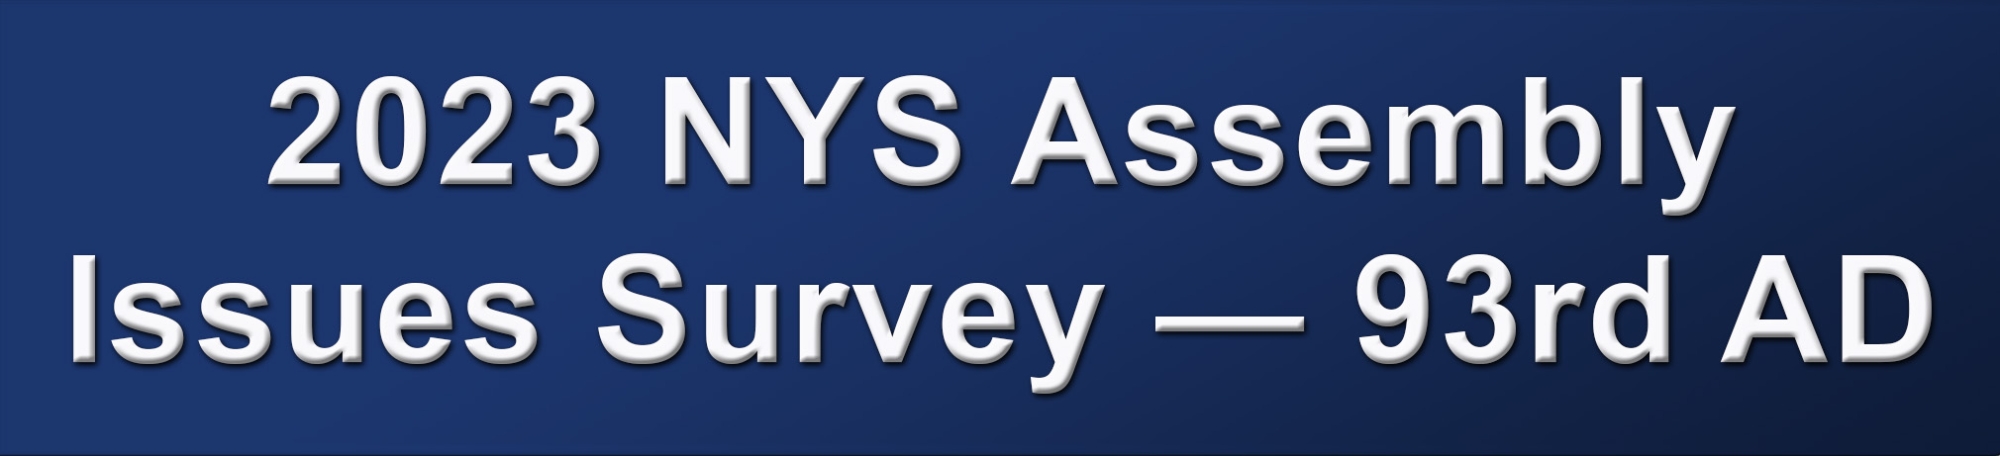 2023 NYS Assembly Issues Survey